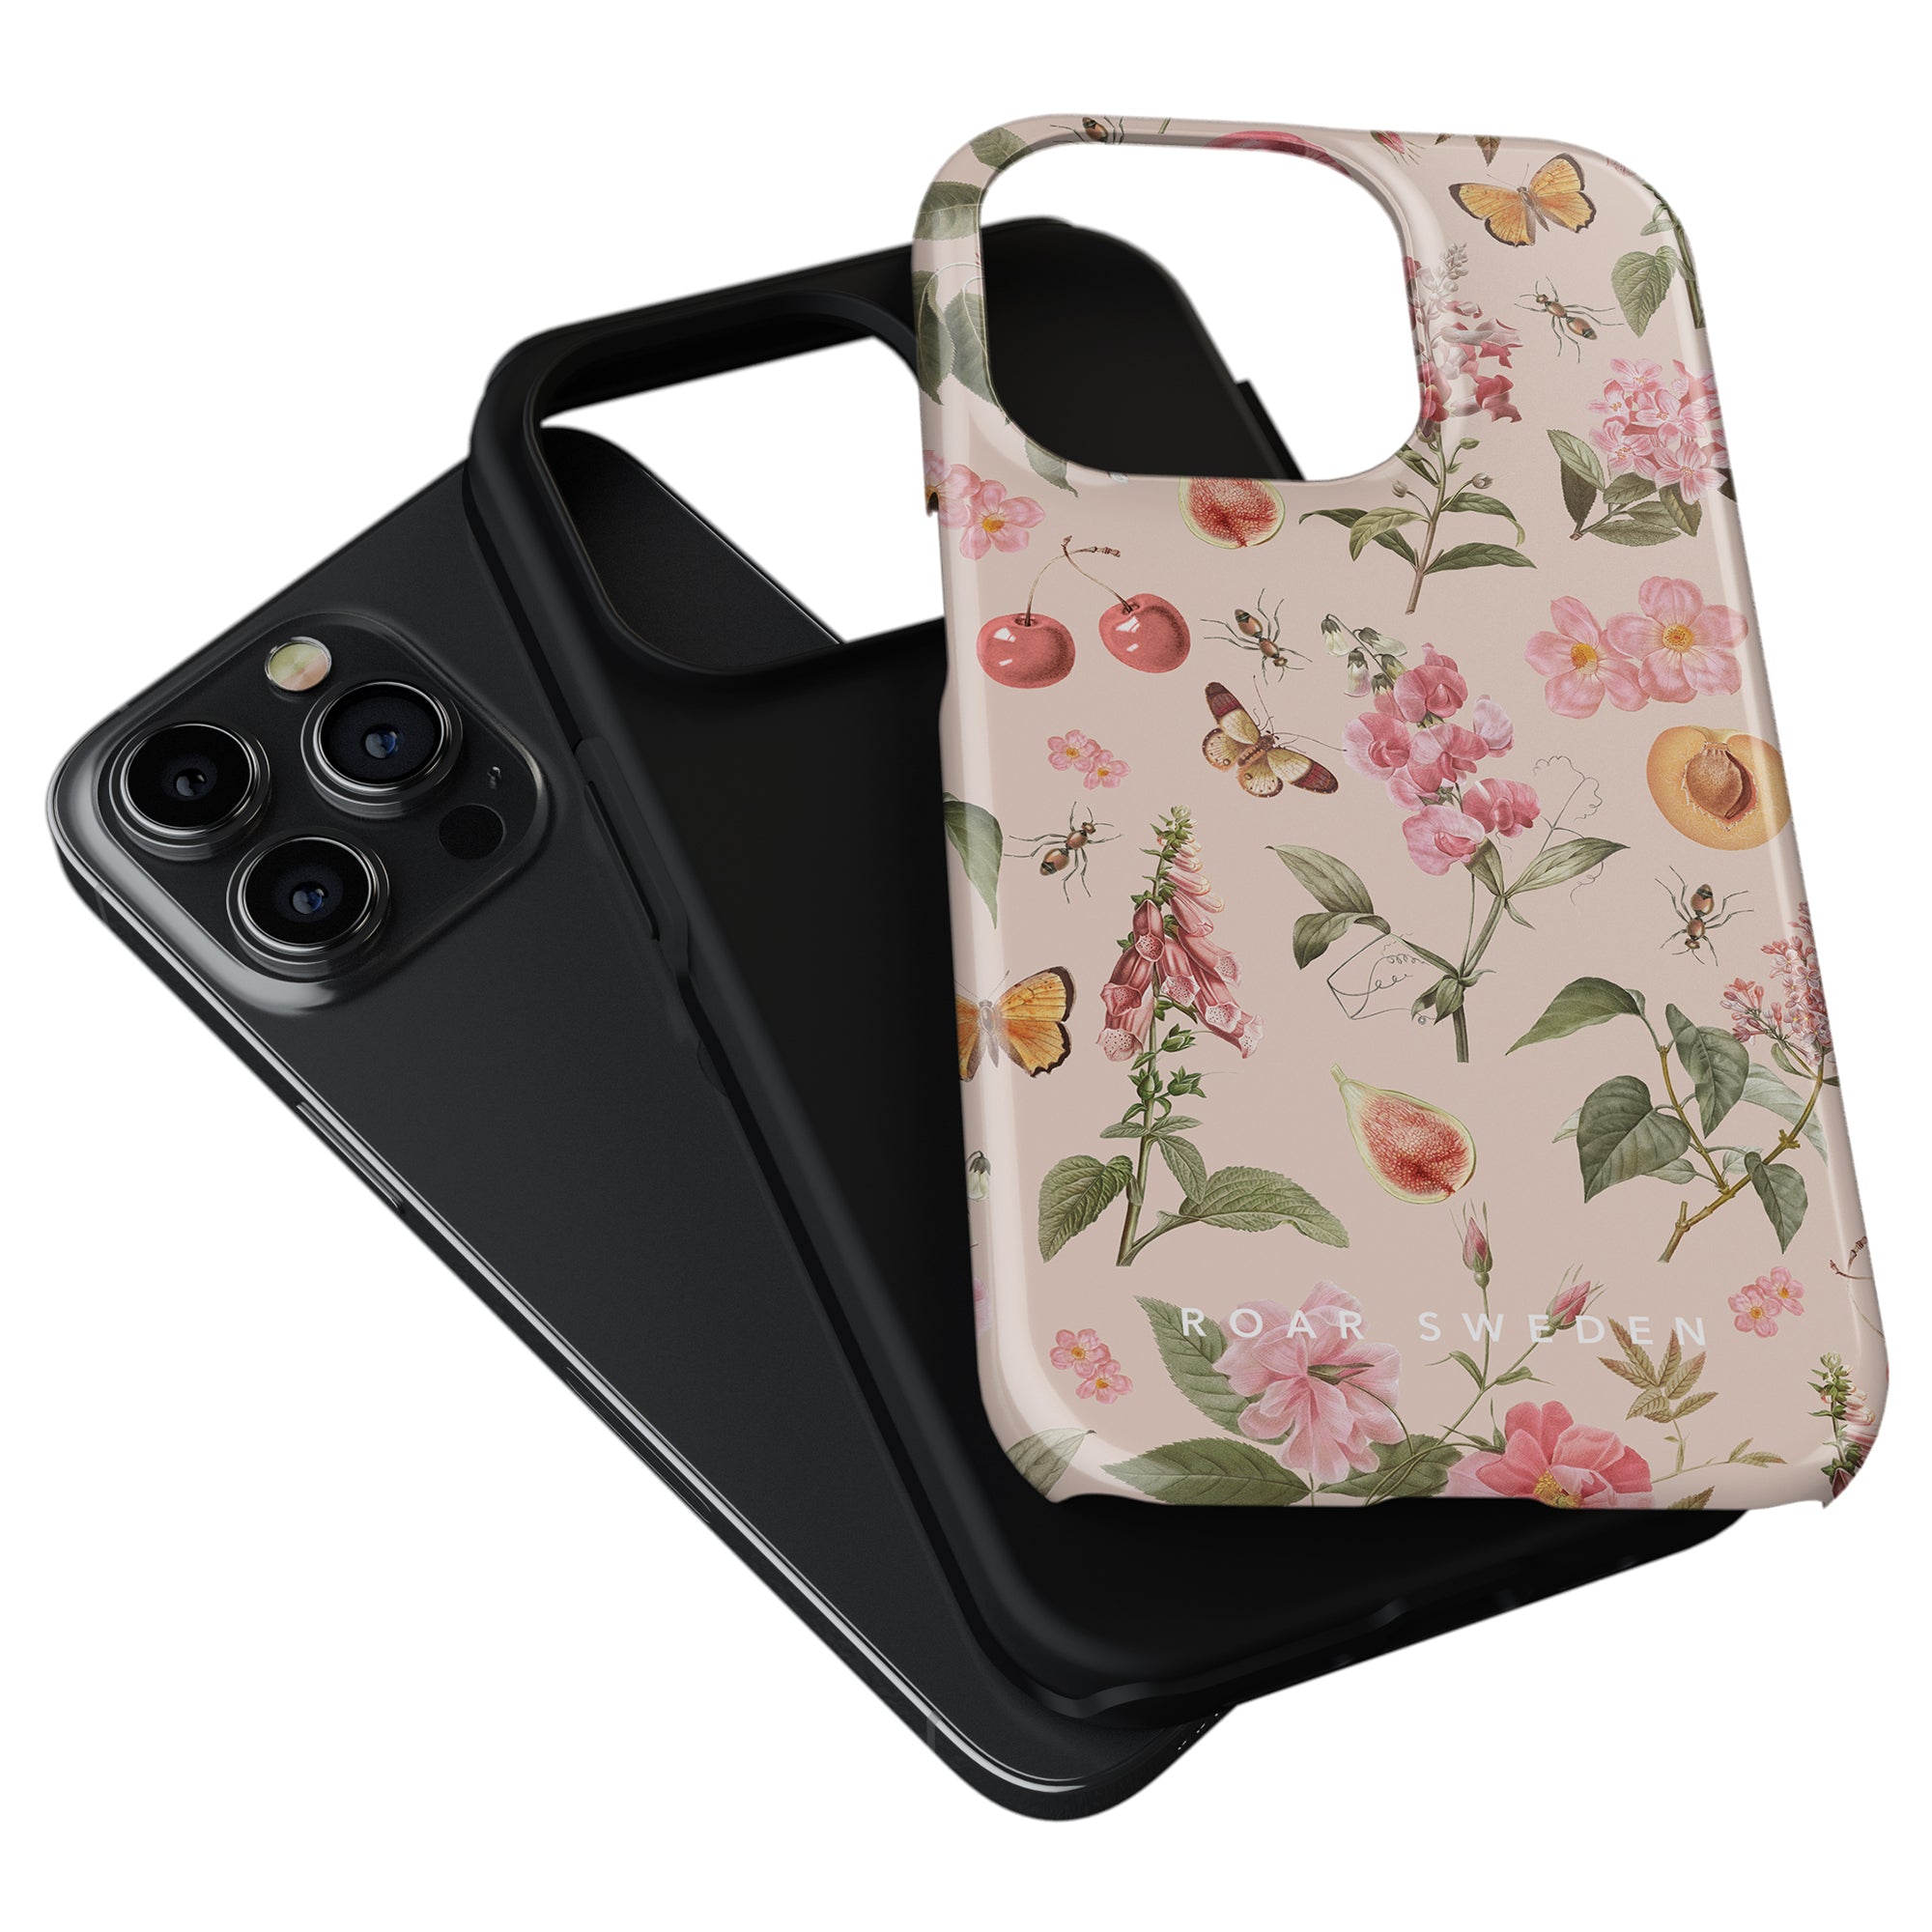 Romantic Spring - Tough Case smartphone with a floral-patterned case featuring blooming flowers next to it.